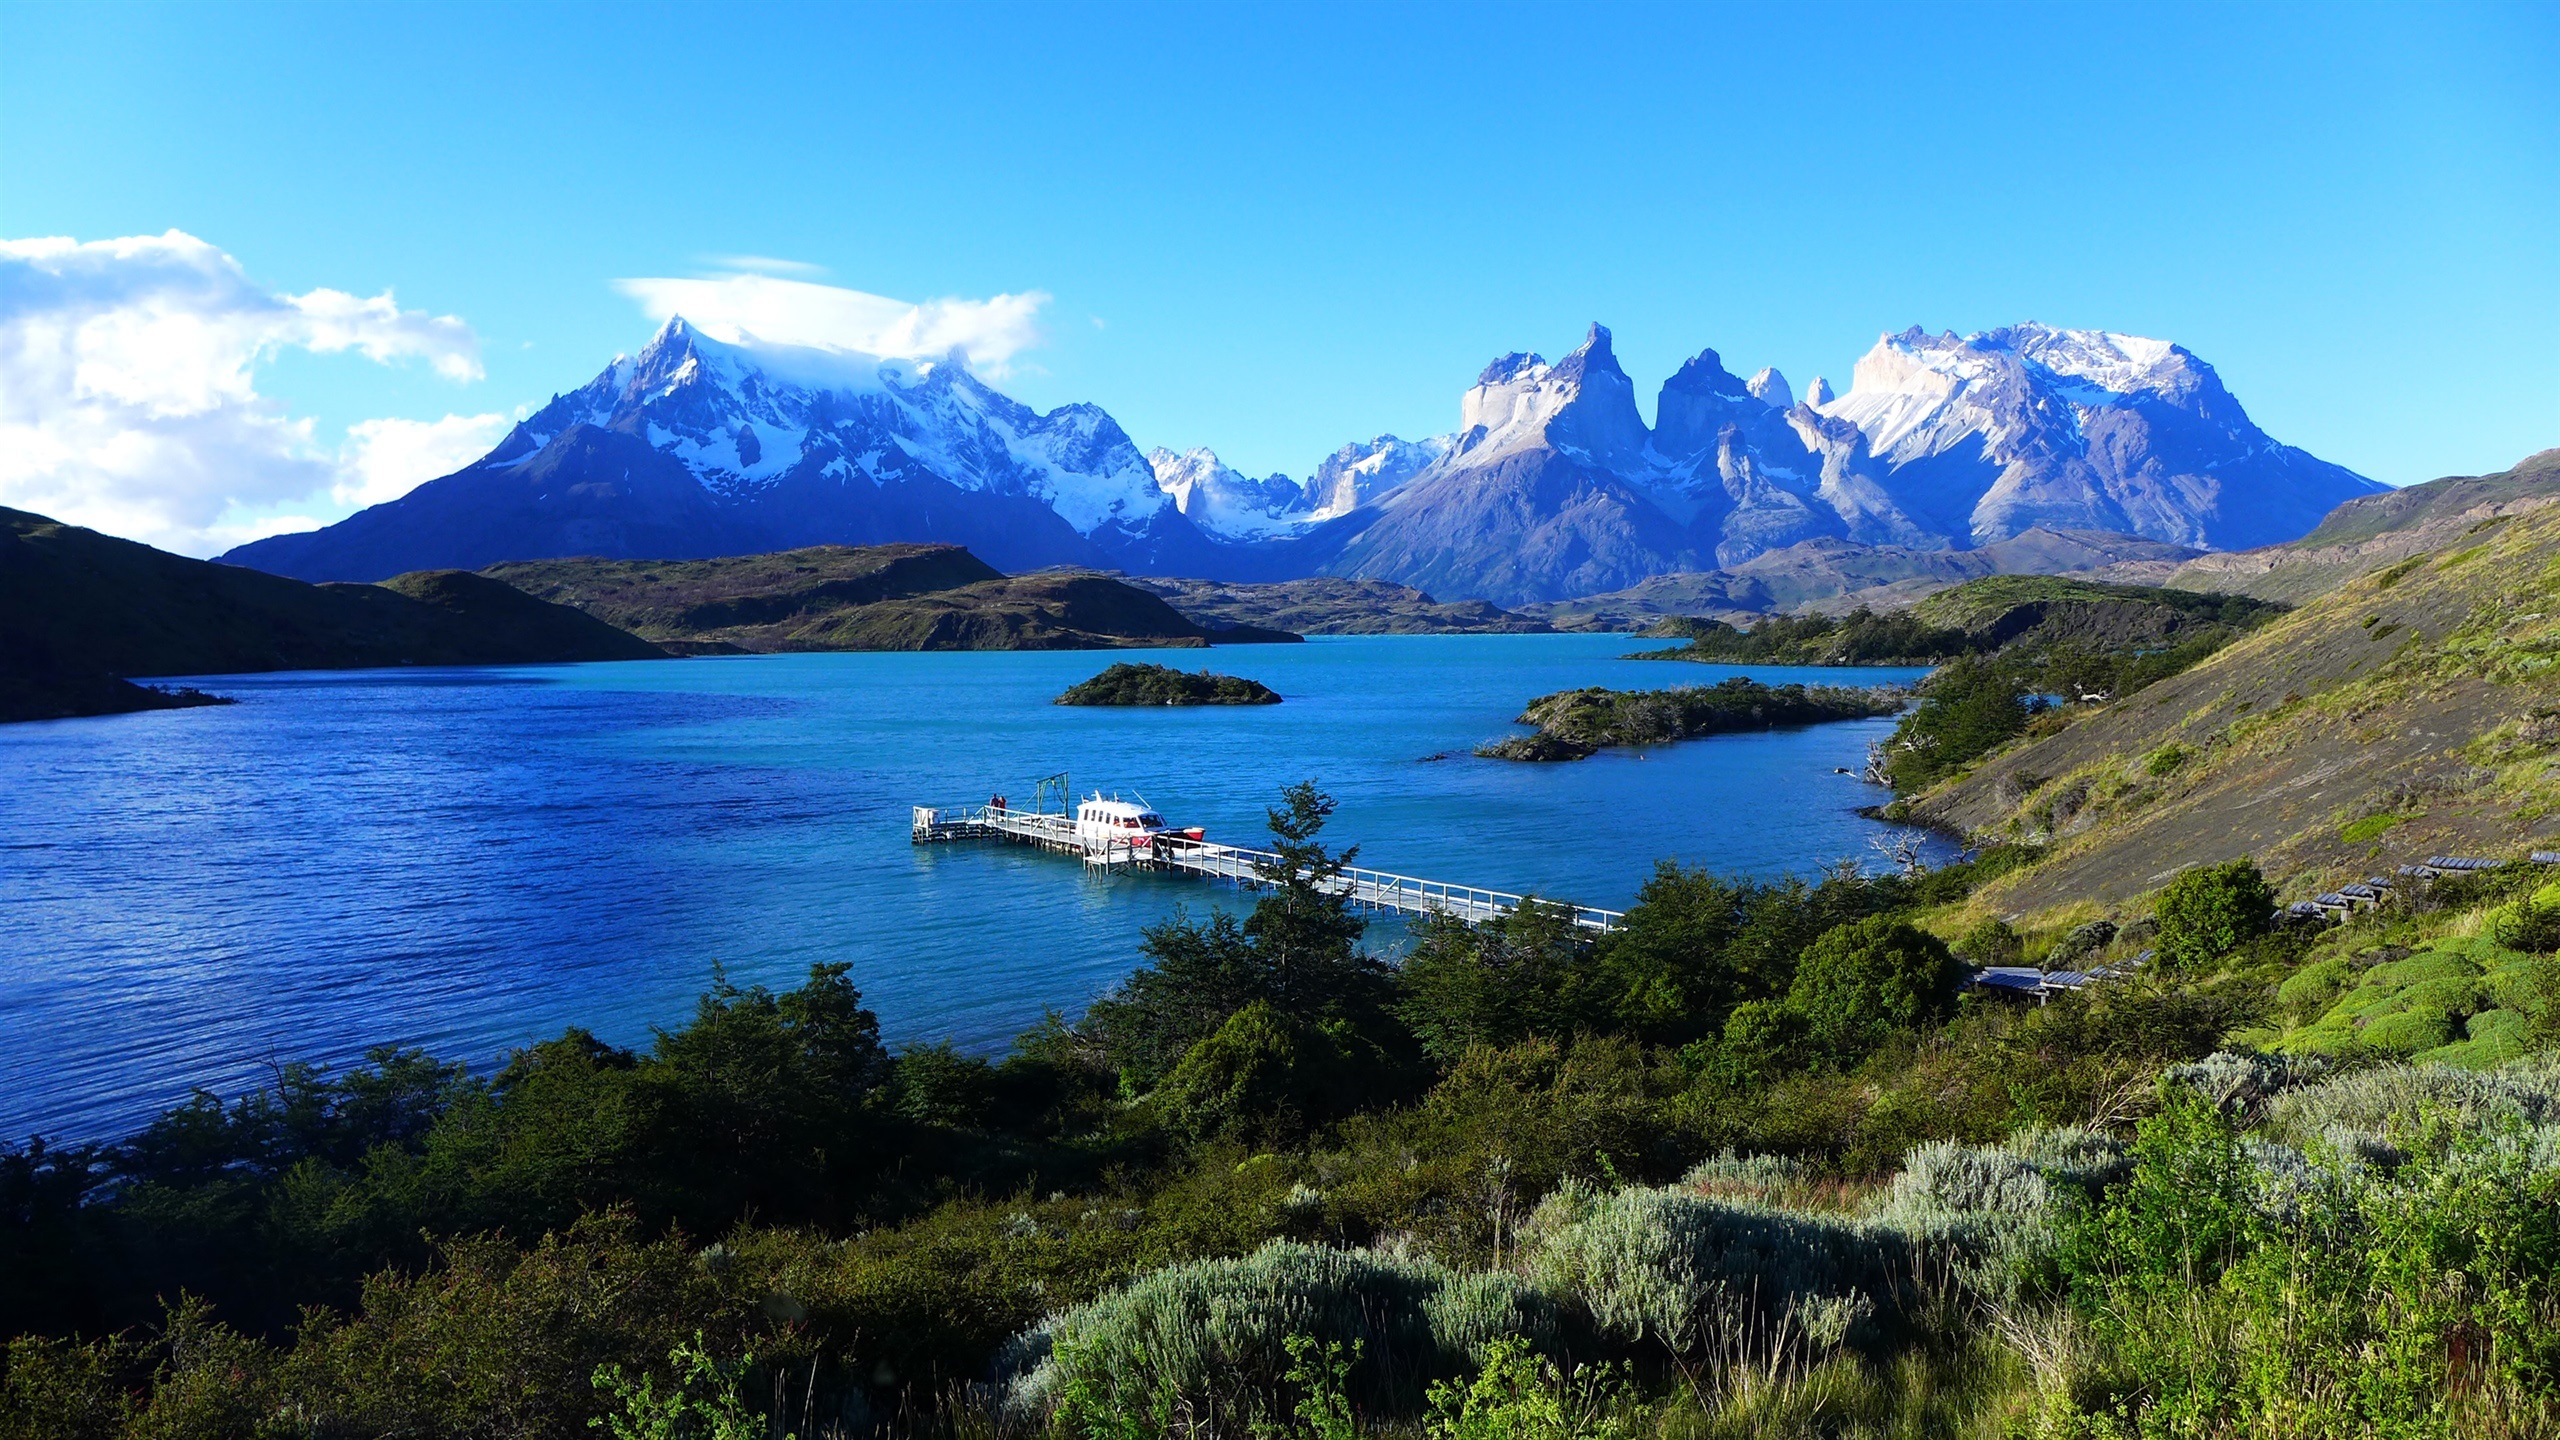 General 2560x1440 landscape nature mountains snow hills lake sky blue clouds plants Chile Patagonia